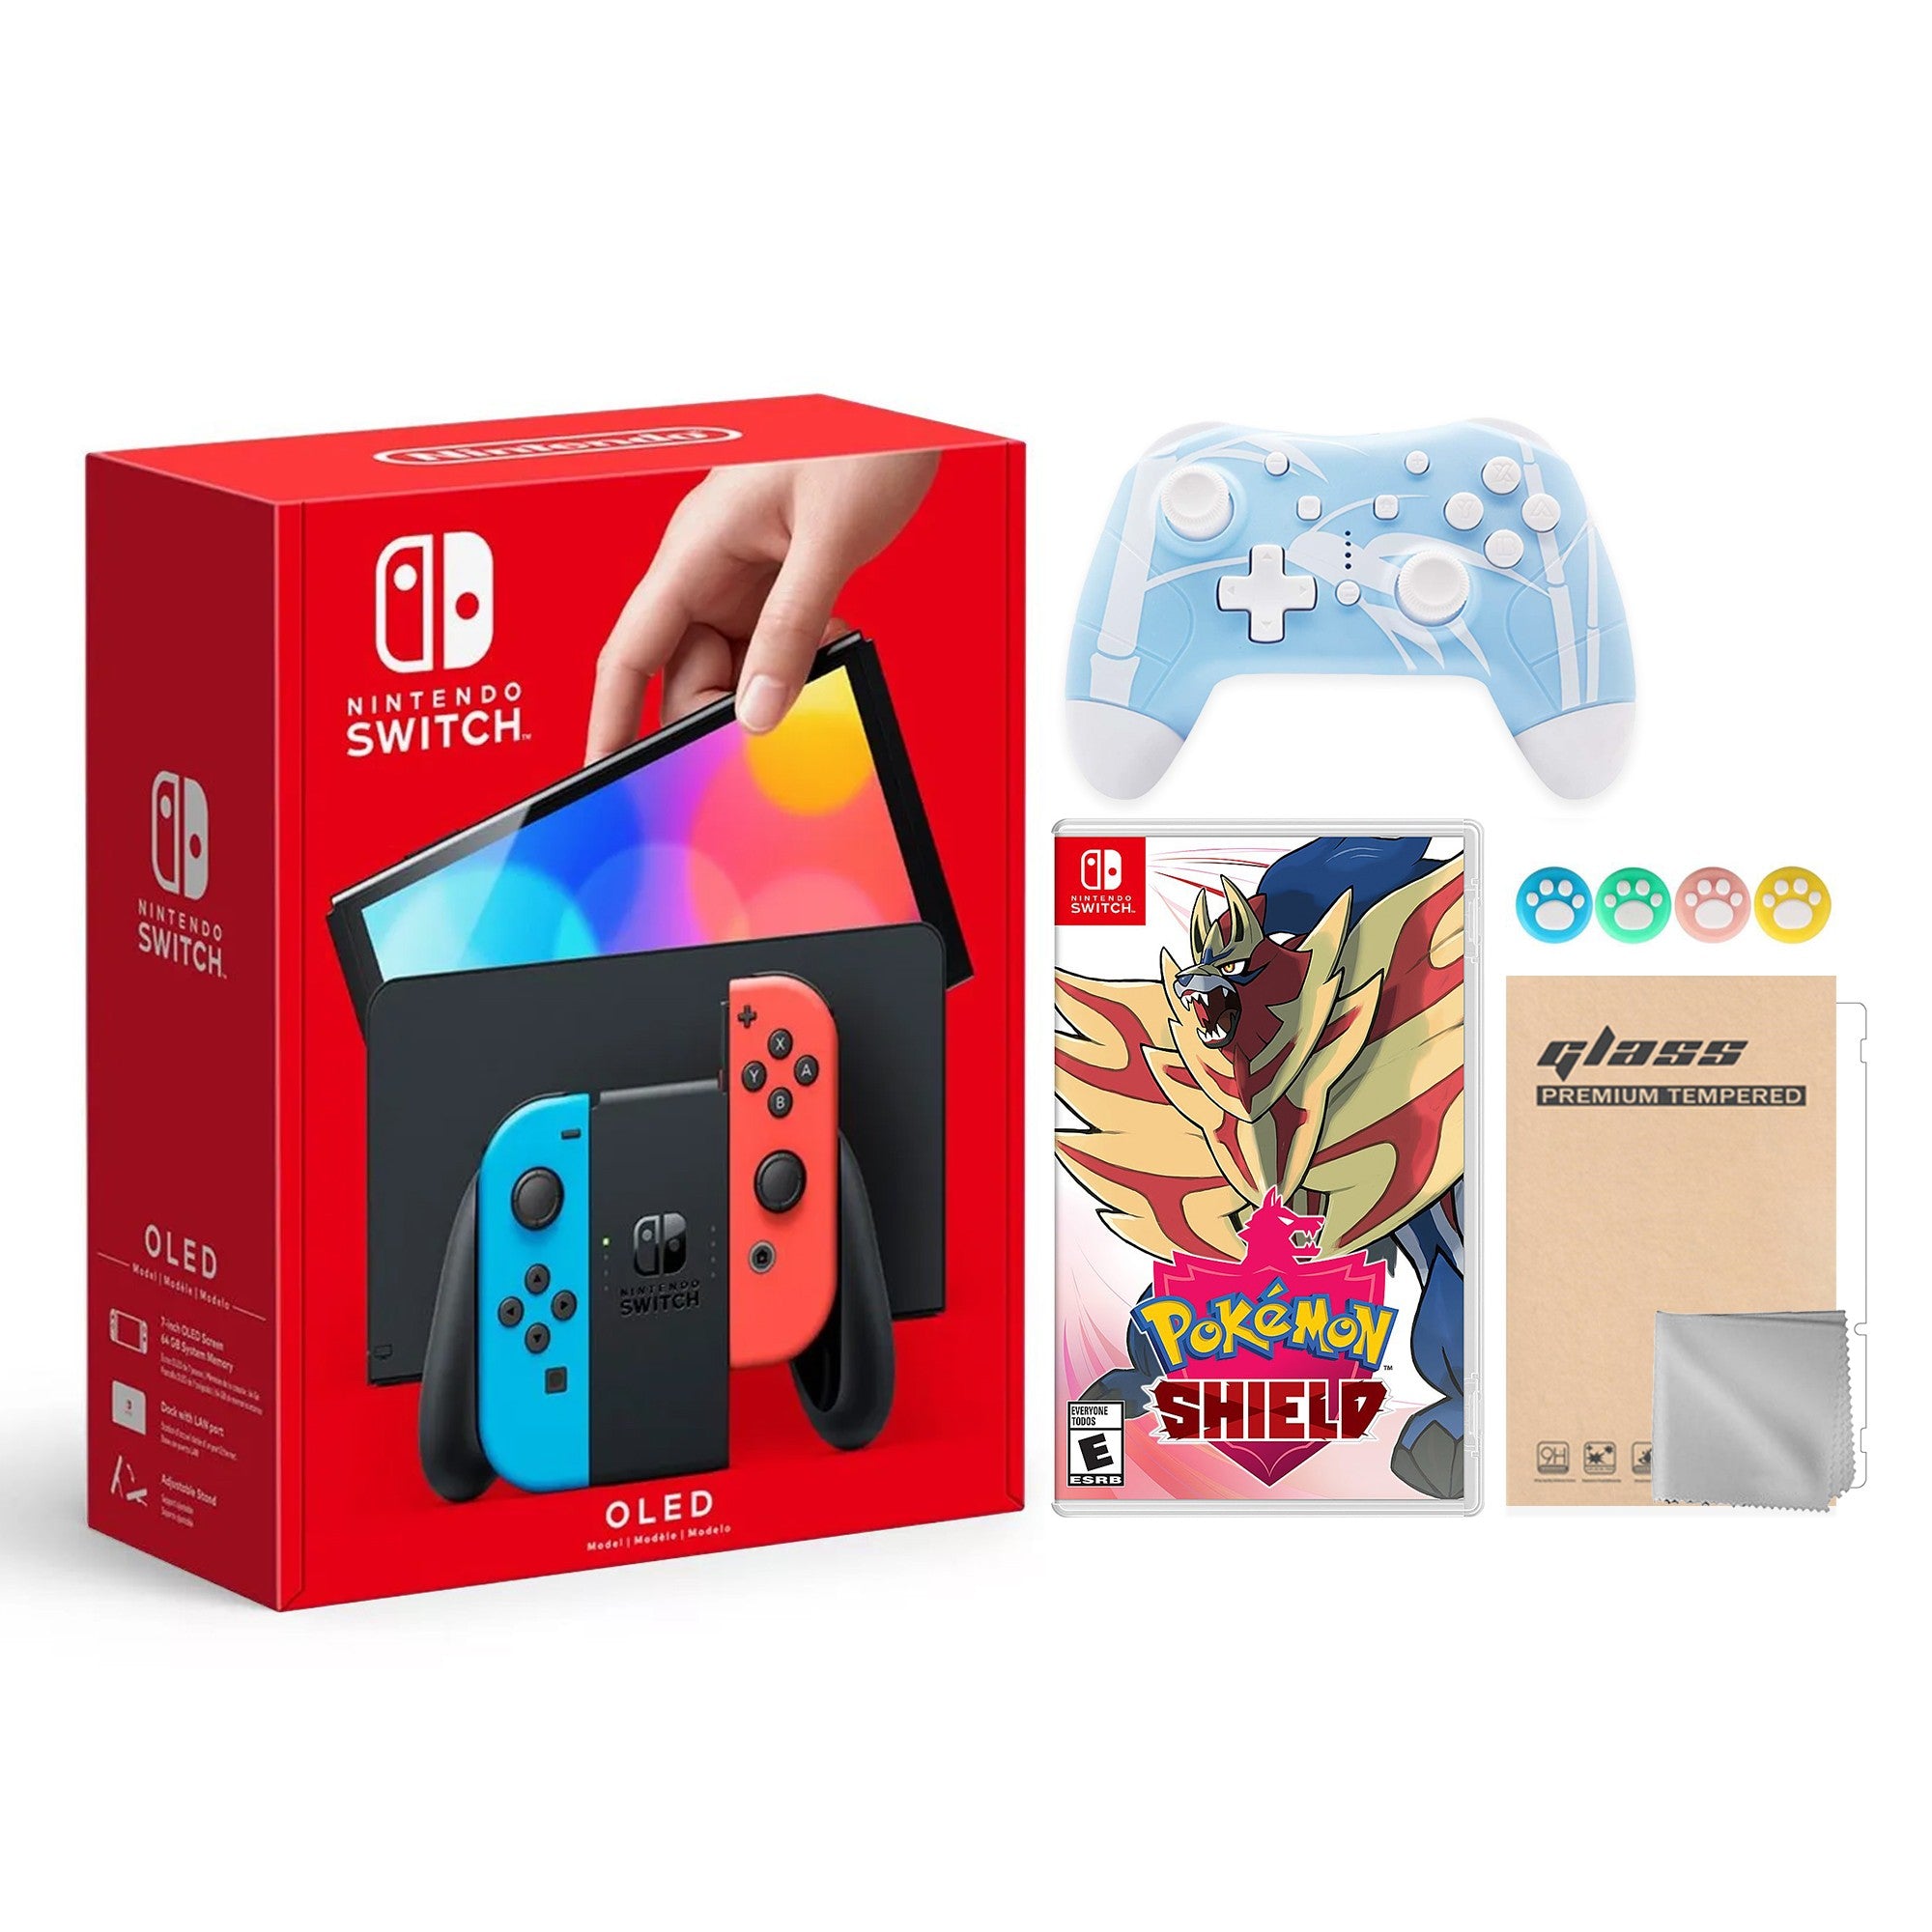 2022 New Nintendo Switch OLED Model Neon Red & Blue Joy Con 64GB Console HD Screen & LAN-Port Dock with Pokemon Shield, Mytrix Wireless Switch Pro Controller and Accessories